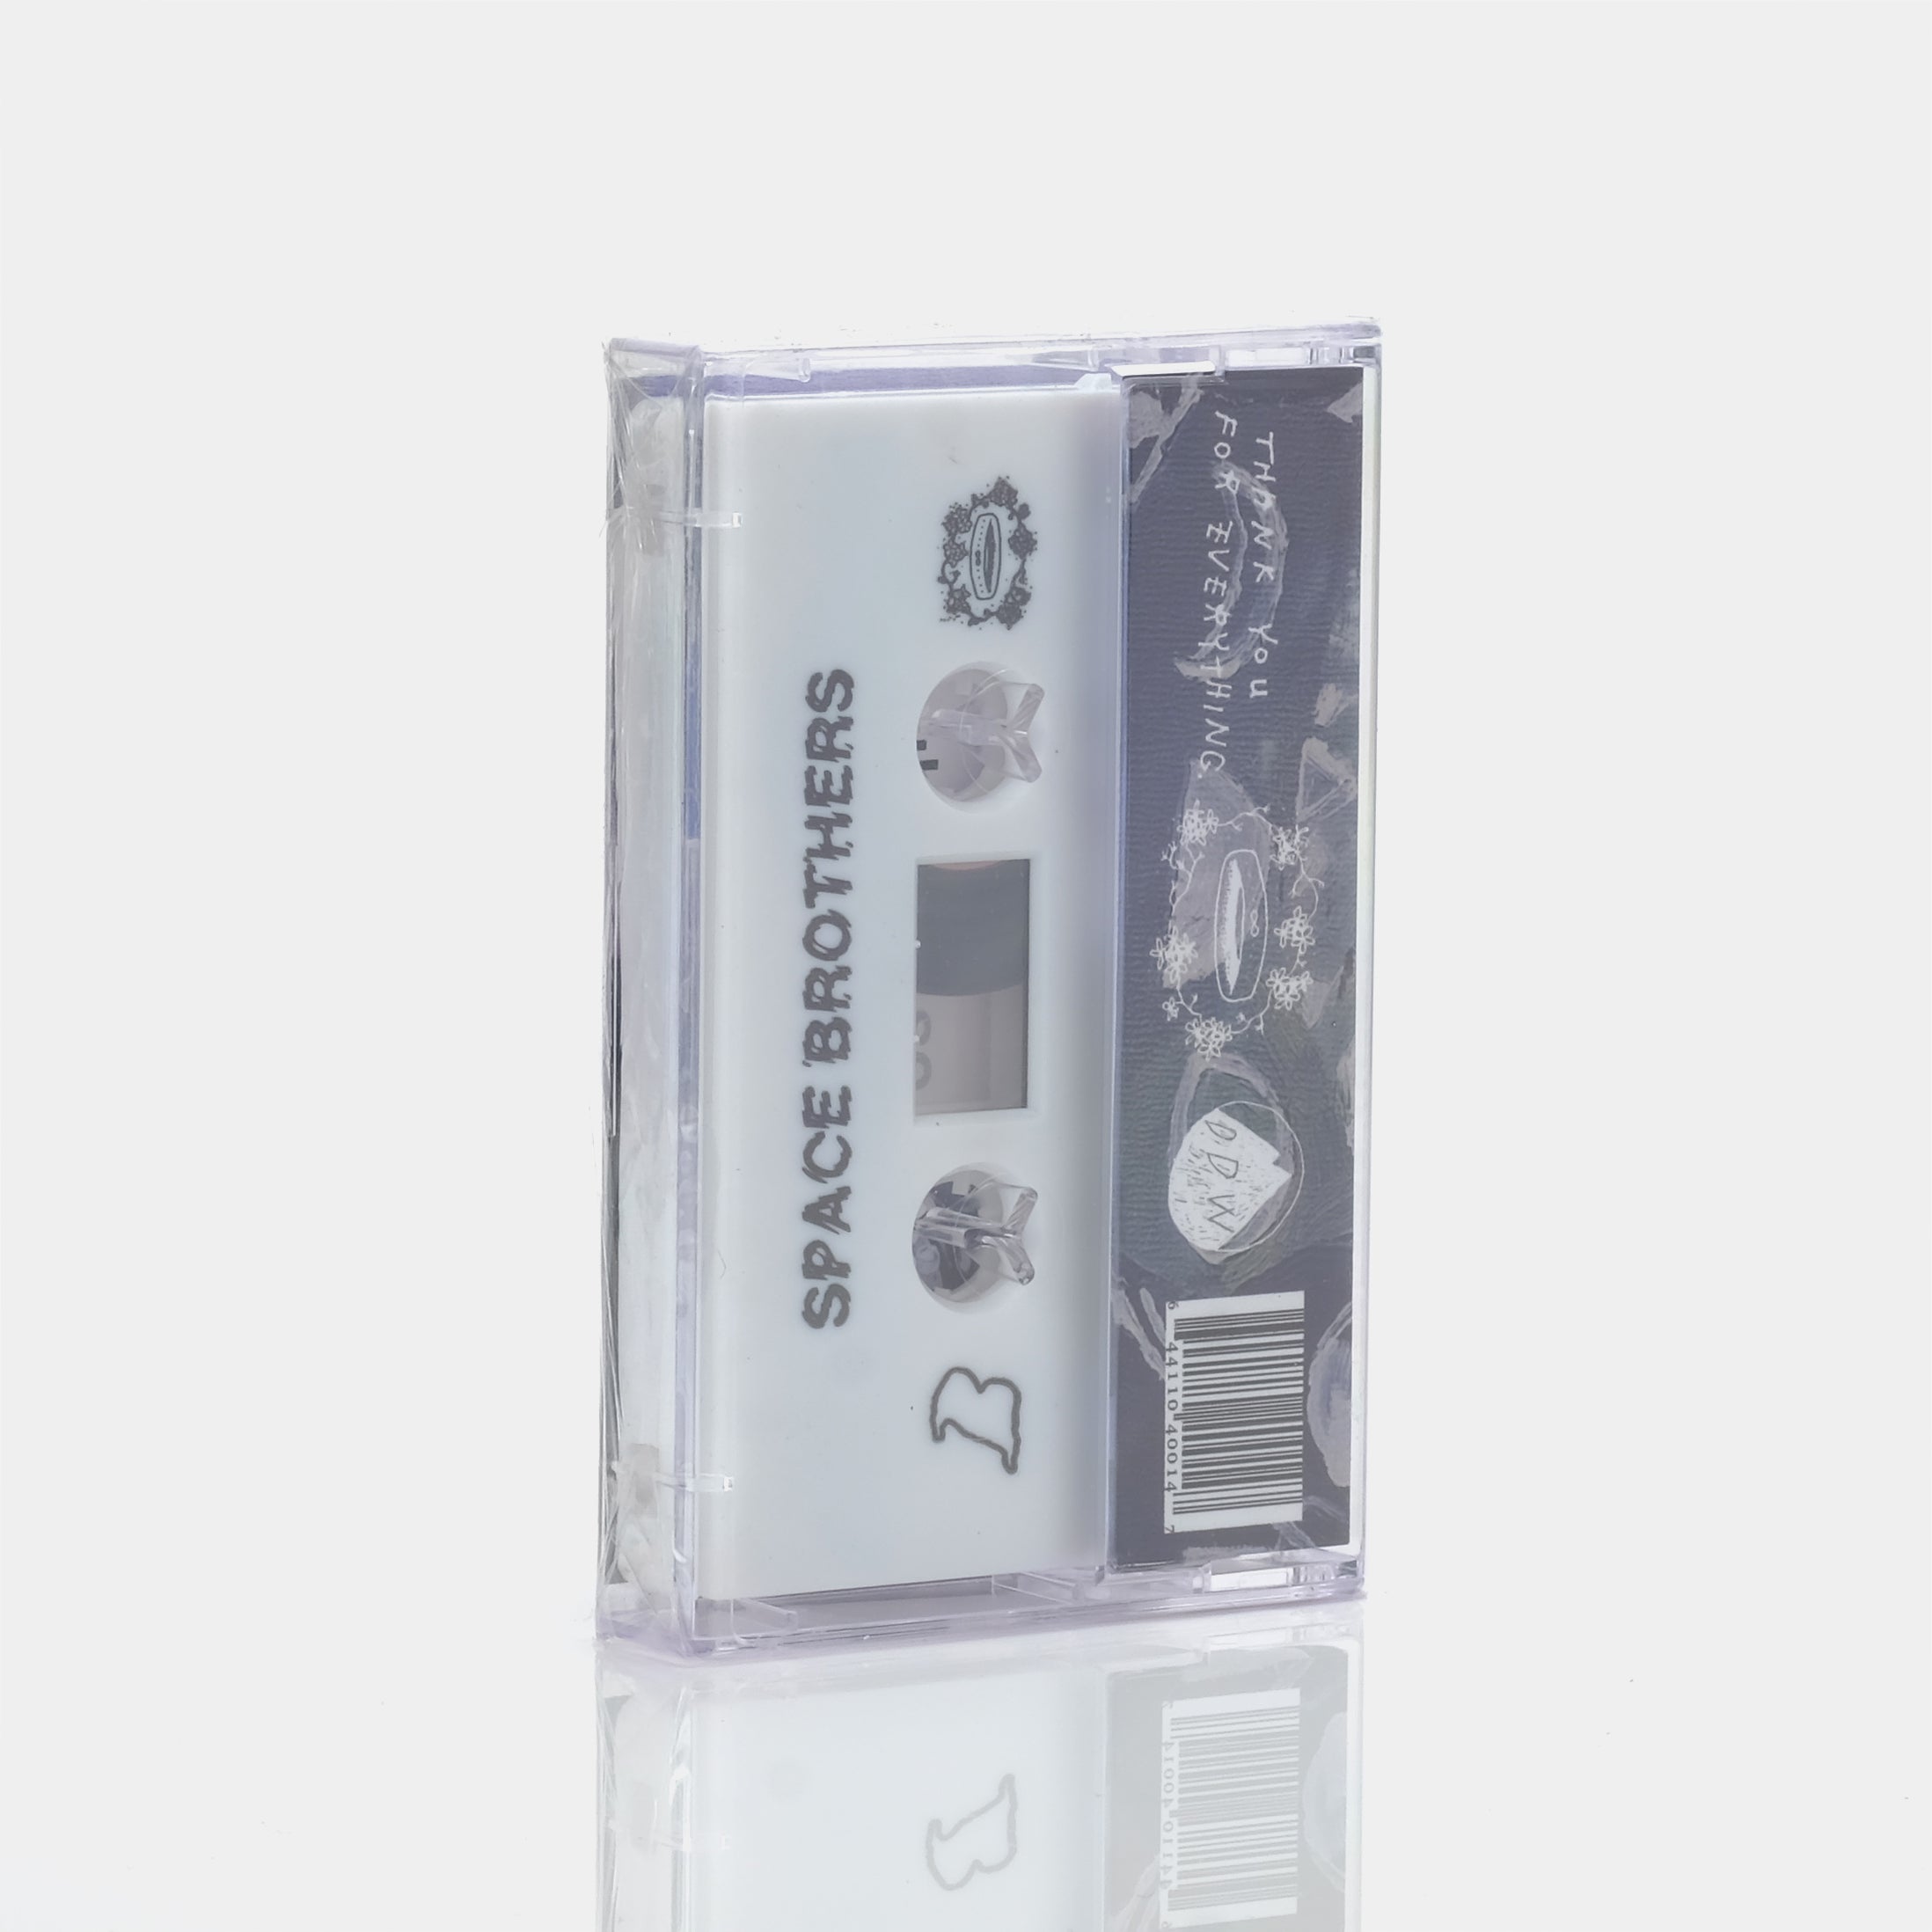 LVL UP - Space Brothers Cassette Tape